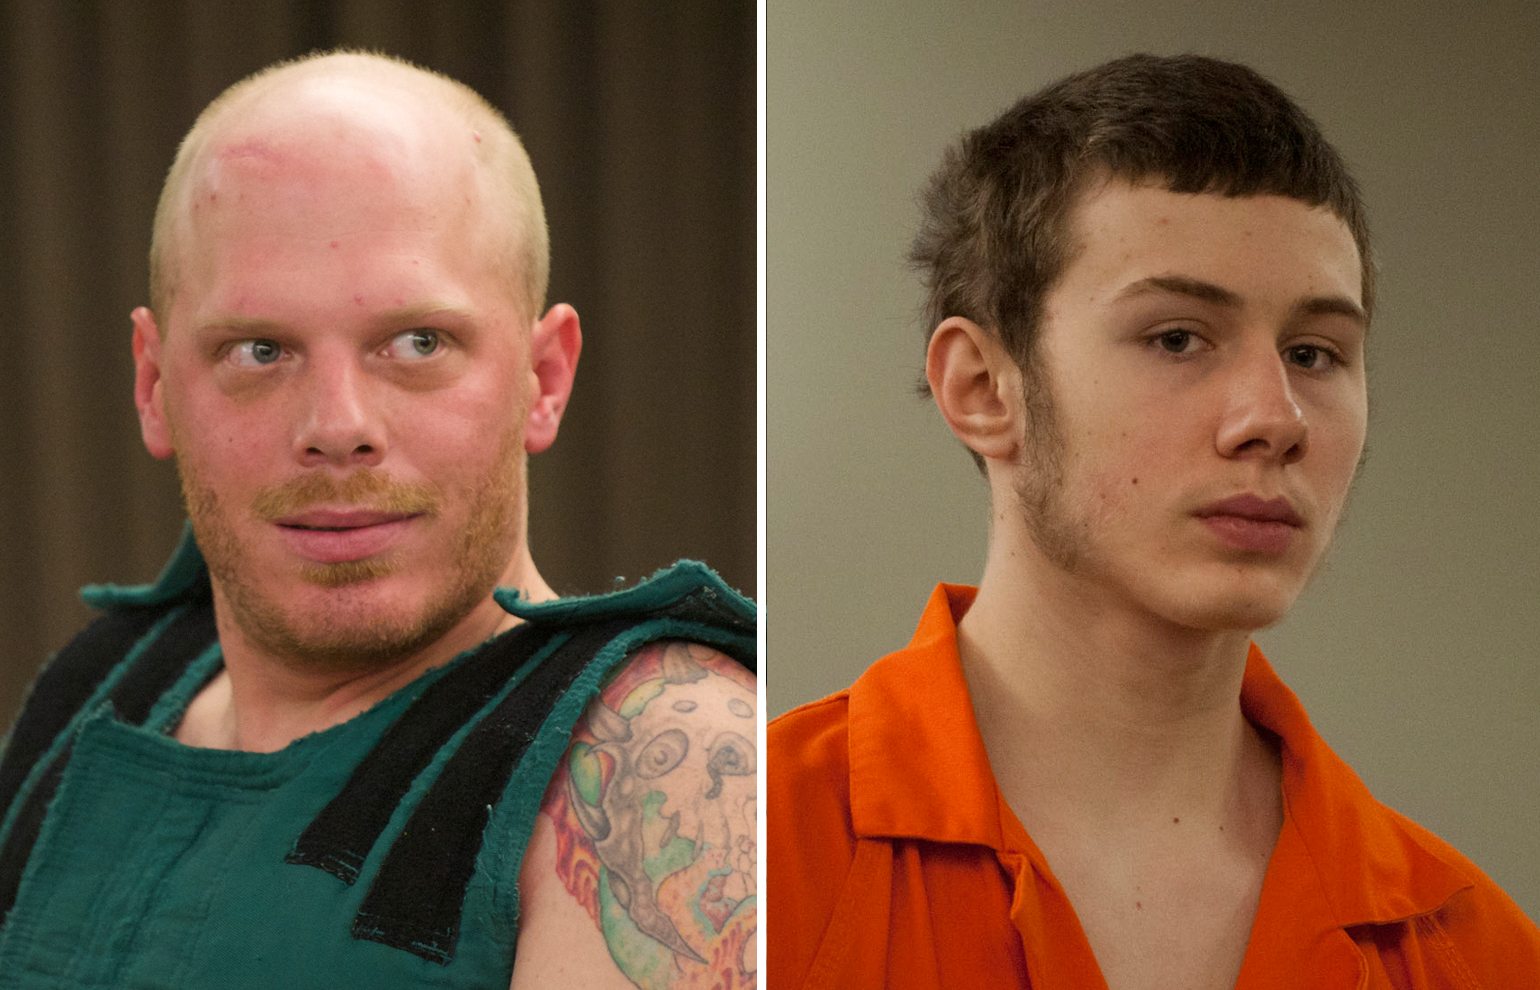 Vincent Burnett, 30, left, was sentenced to 17 years, and 16-year-old Roy Thompson Jr. was sentenced to 16 years  in violent 2015 residential burglary, in which Buddhist nun was attacked.